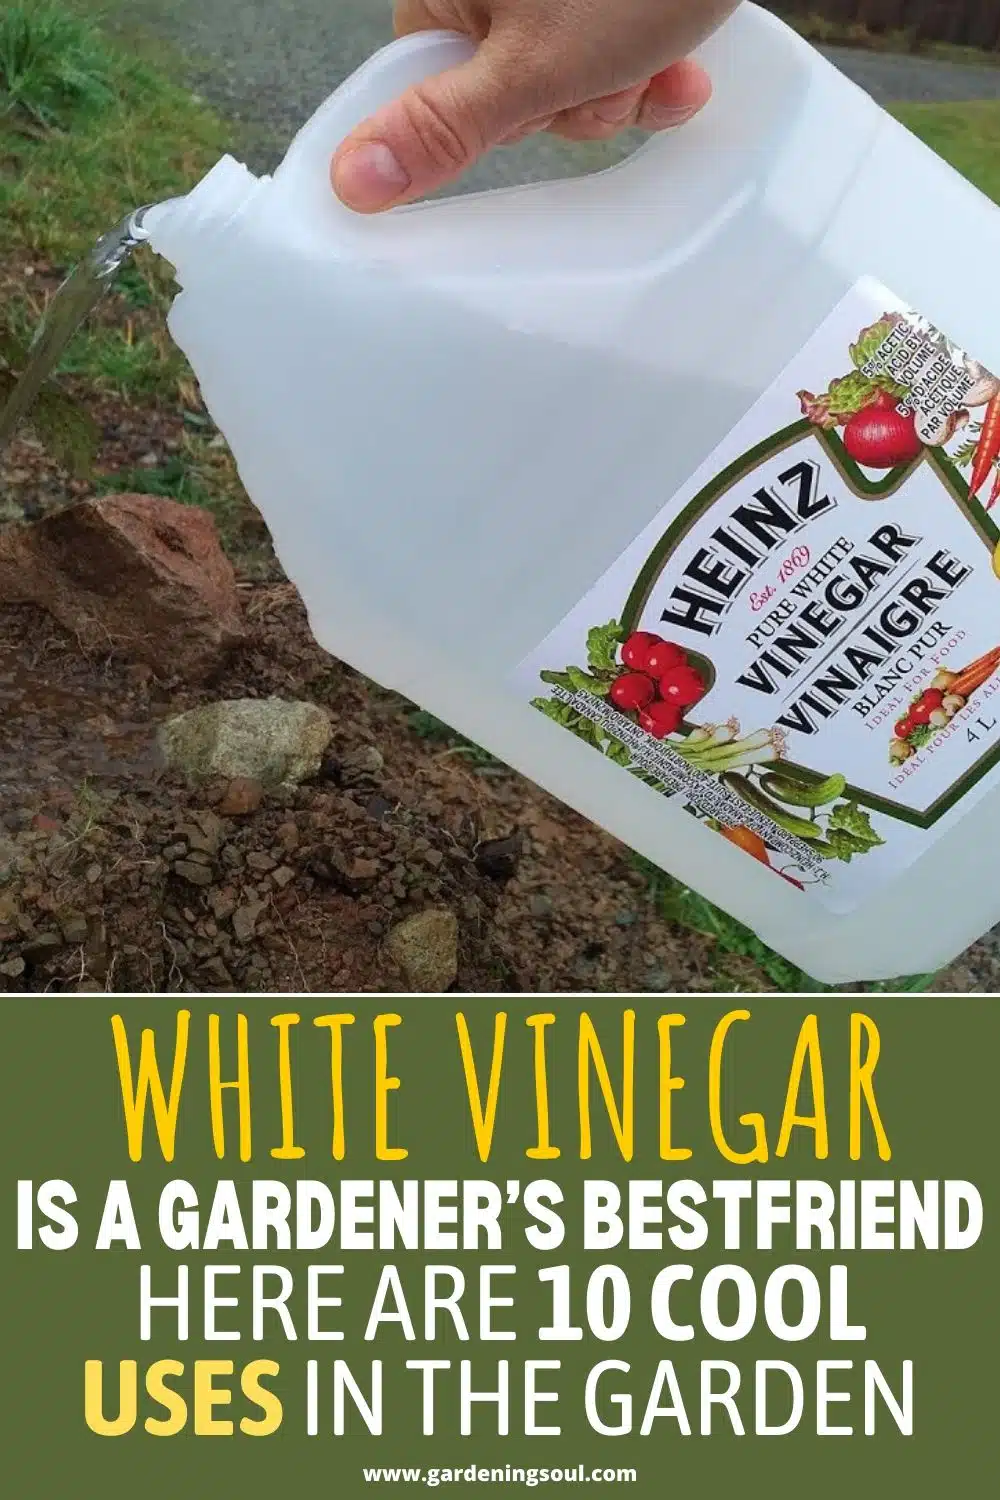 Natural Home for Pet Owners Vinegar for Cleaning PetMD